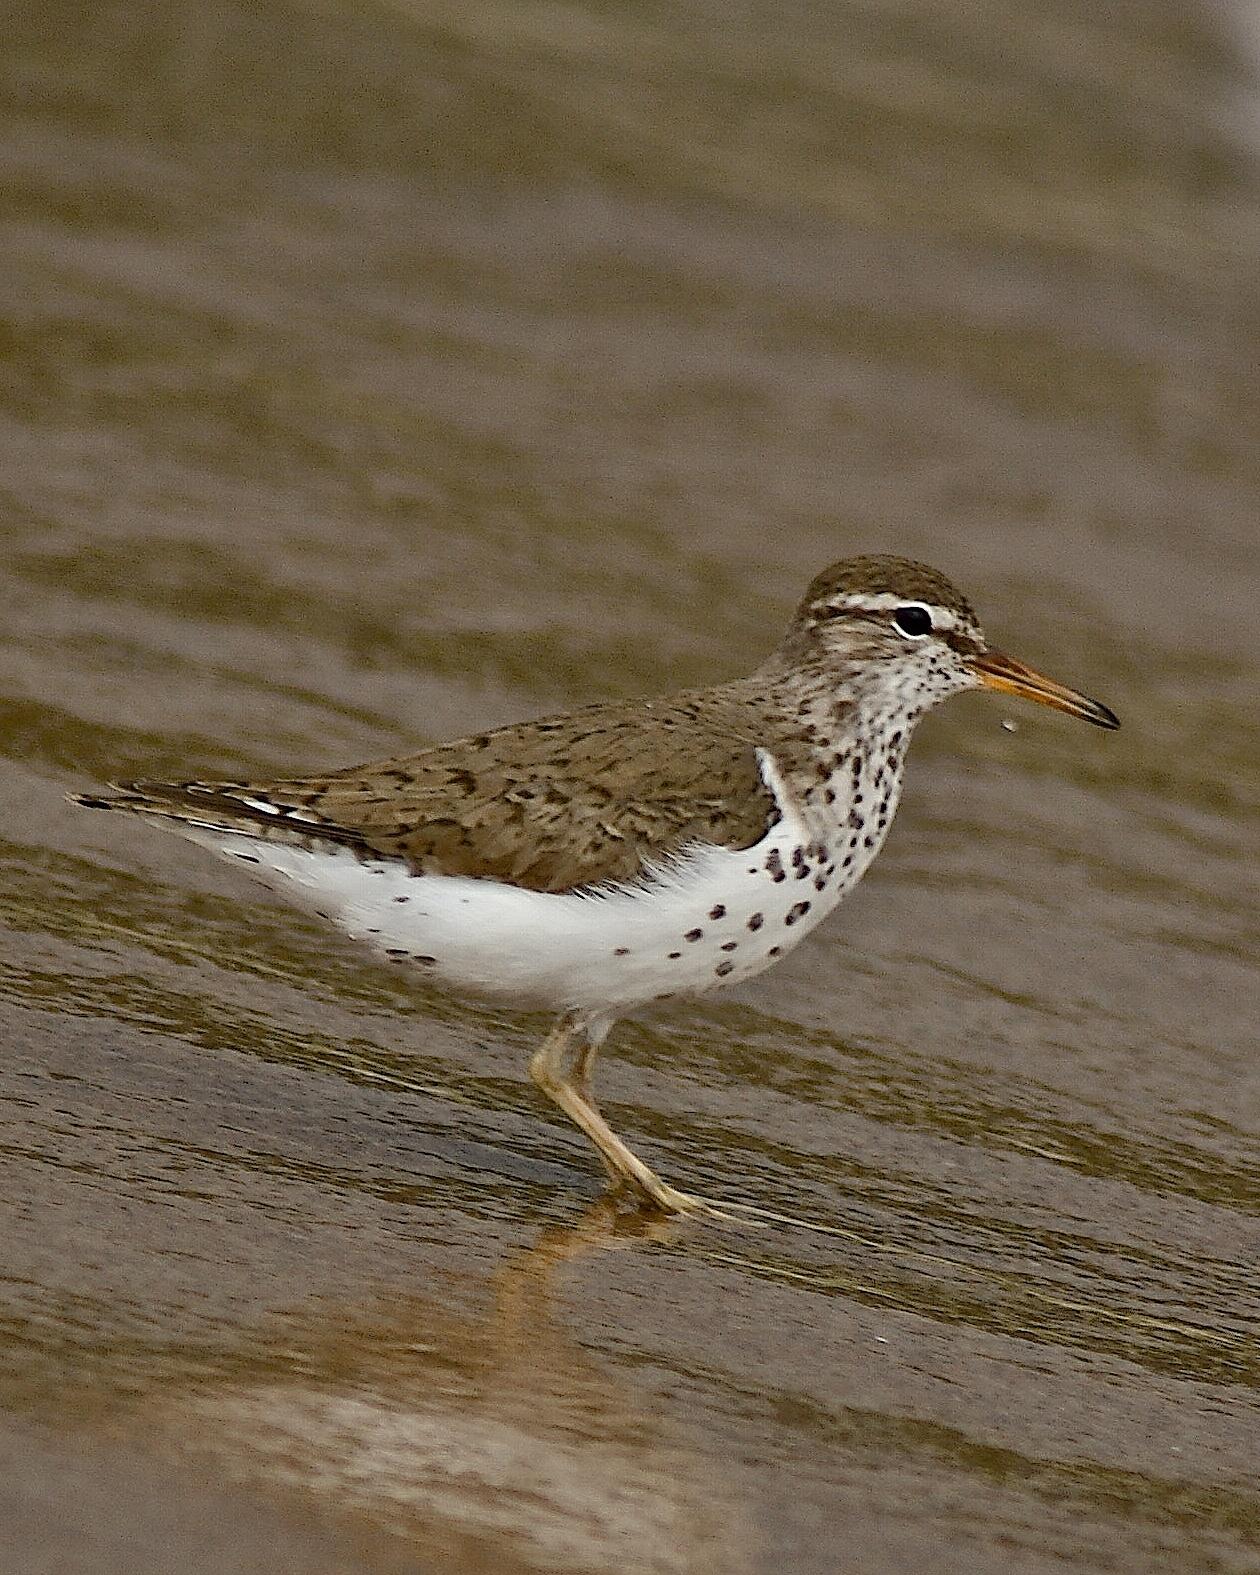 Spotted Sandpiper Photo by Gerald Hoekstra